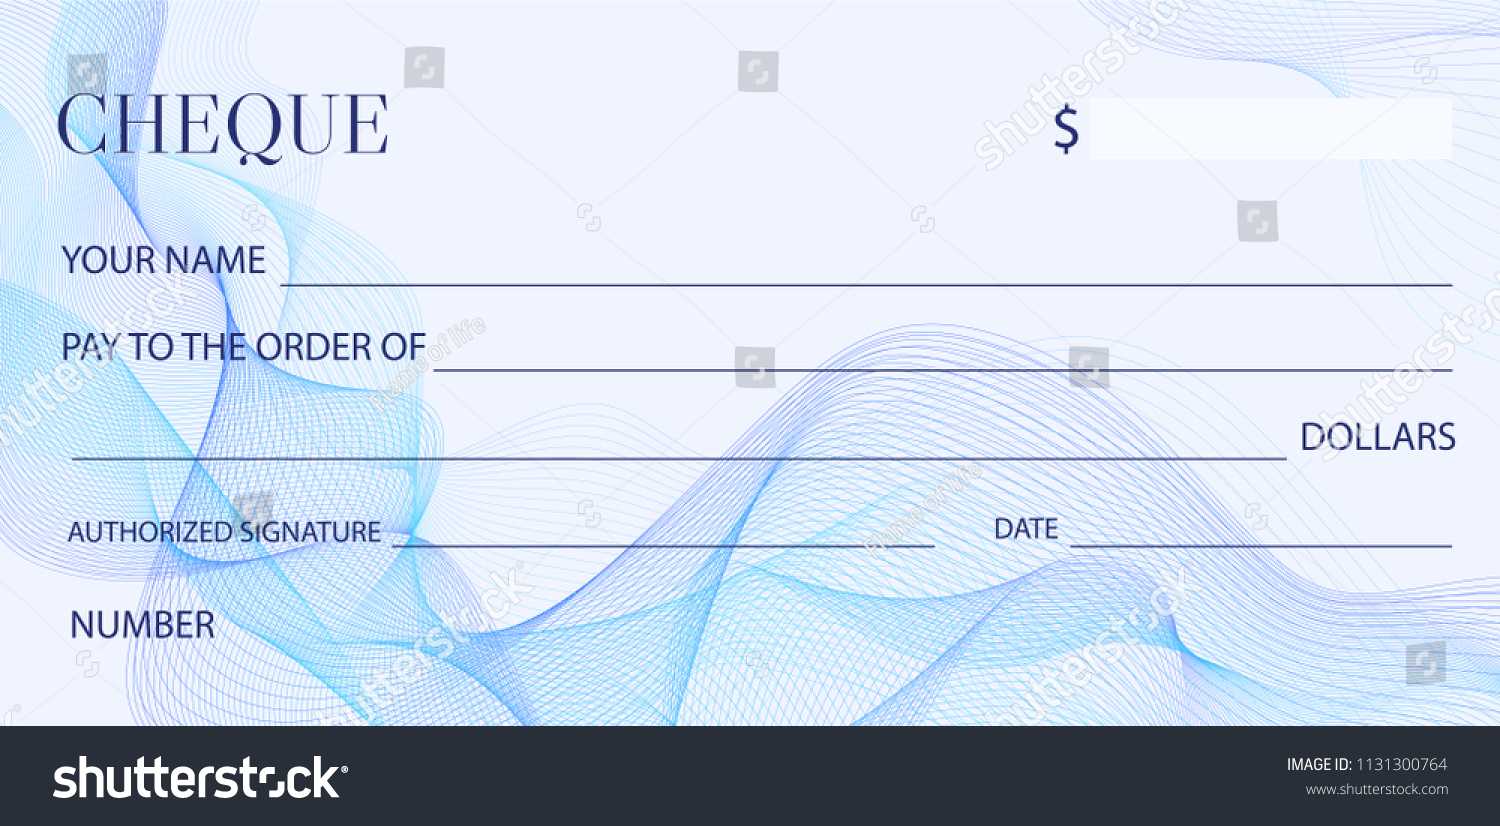 Cheque Check Template Chequebook Template Blank | Royalty With Blank Business Check Template